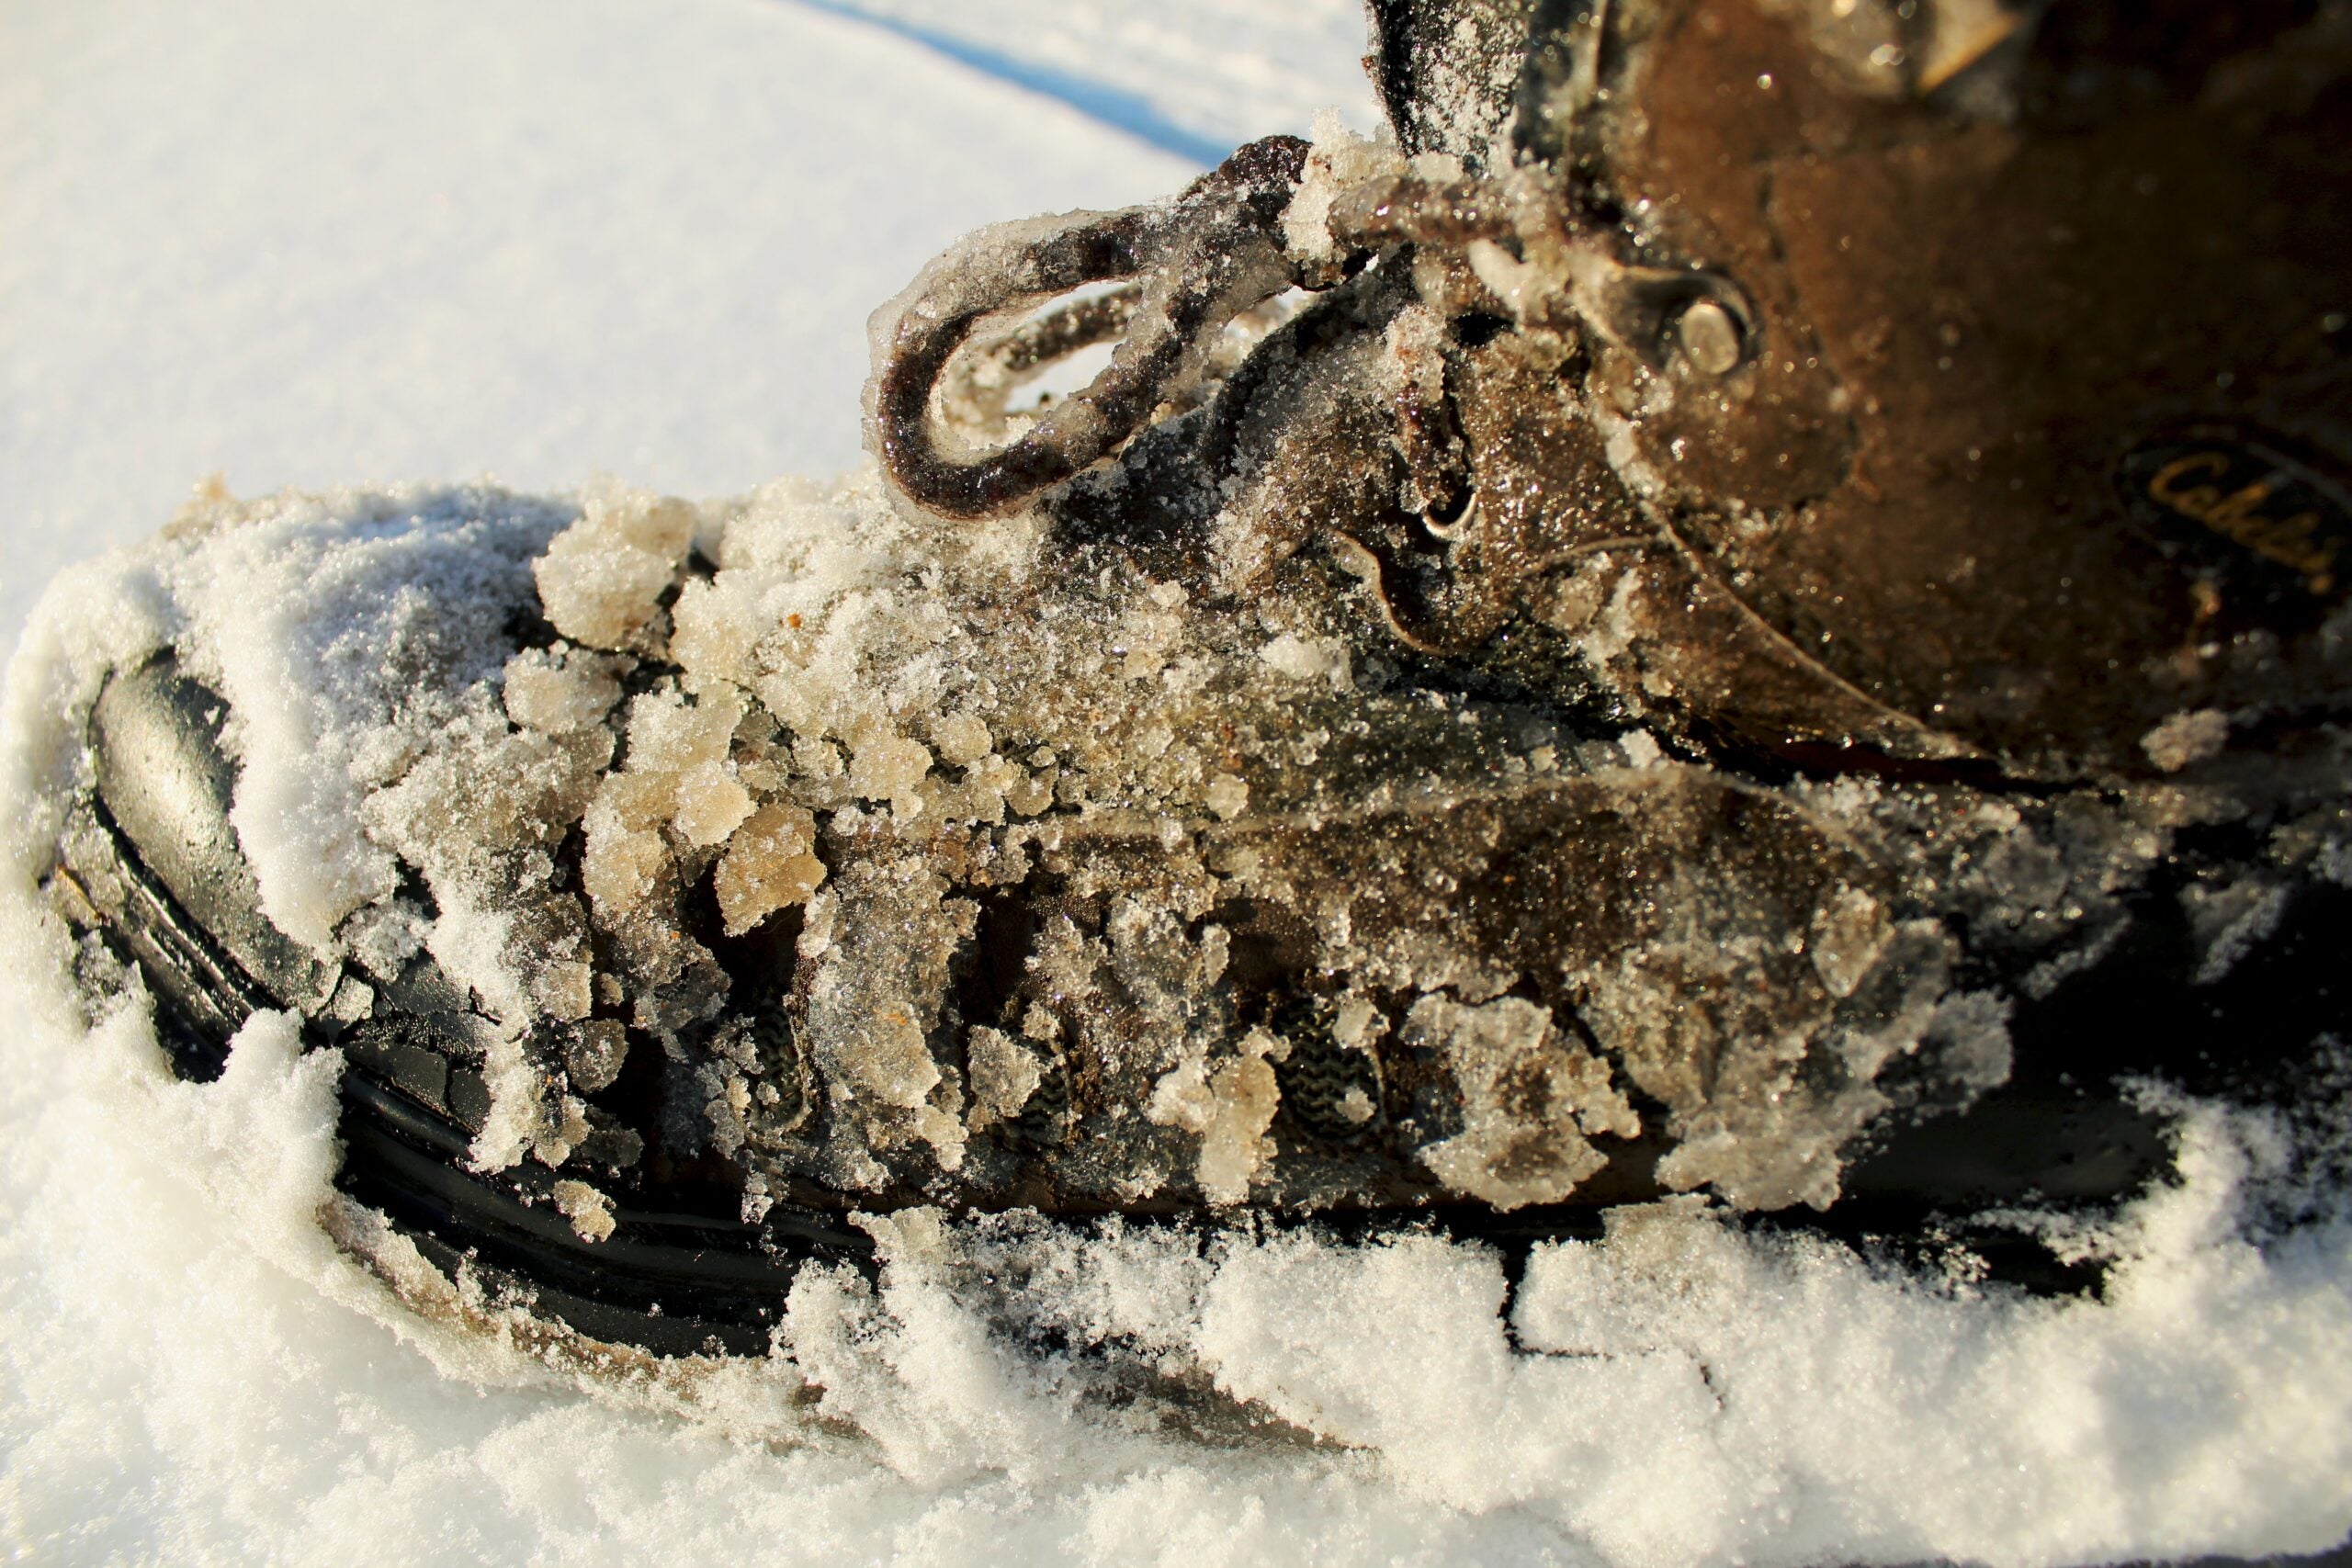 We tested some of the wading boots in sub-zero temperatures on icy rivers.